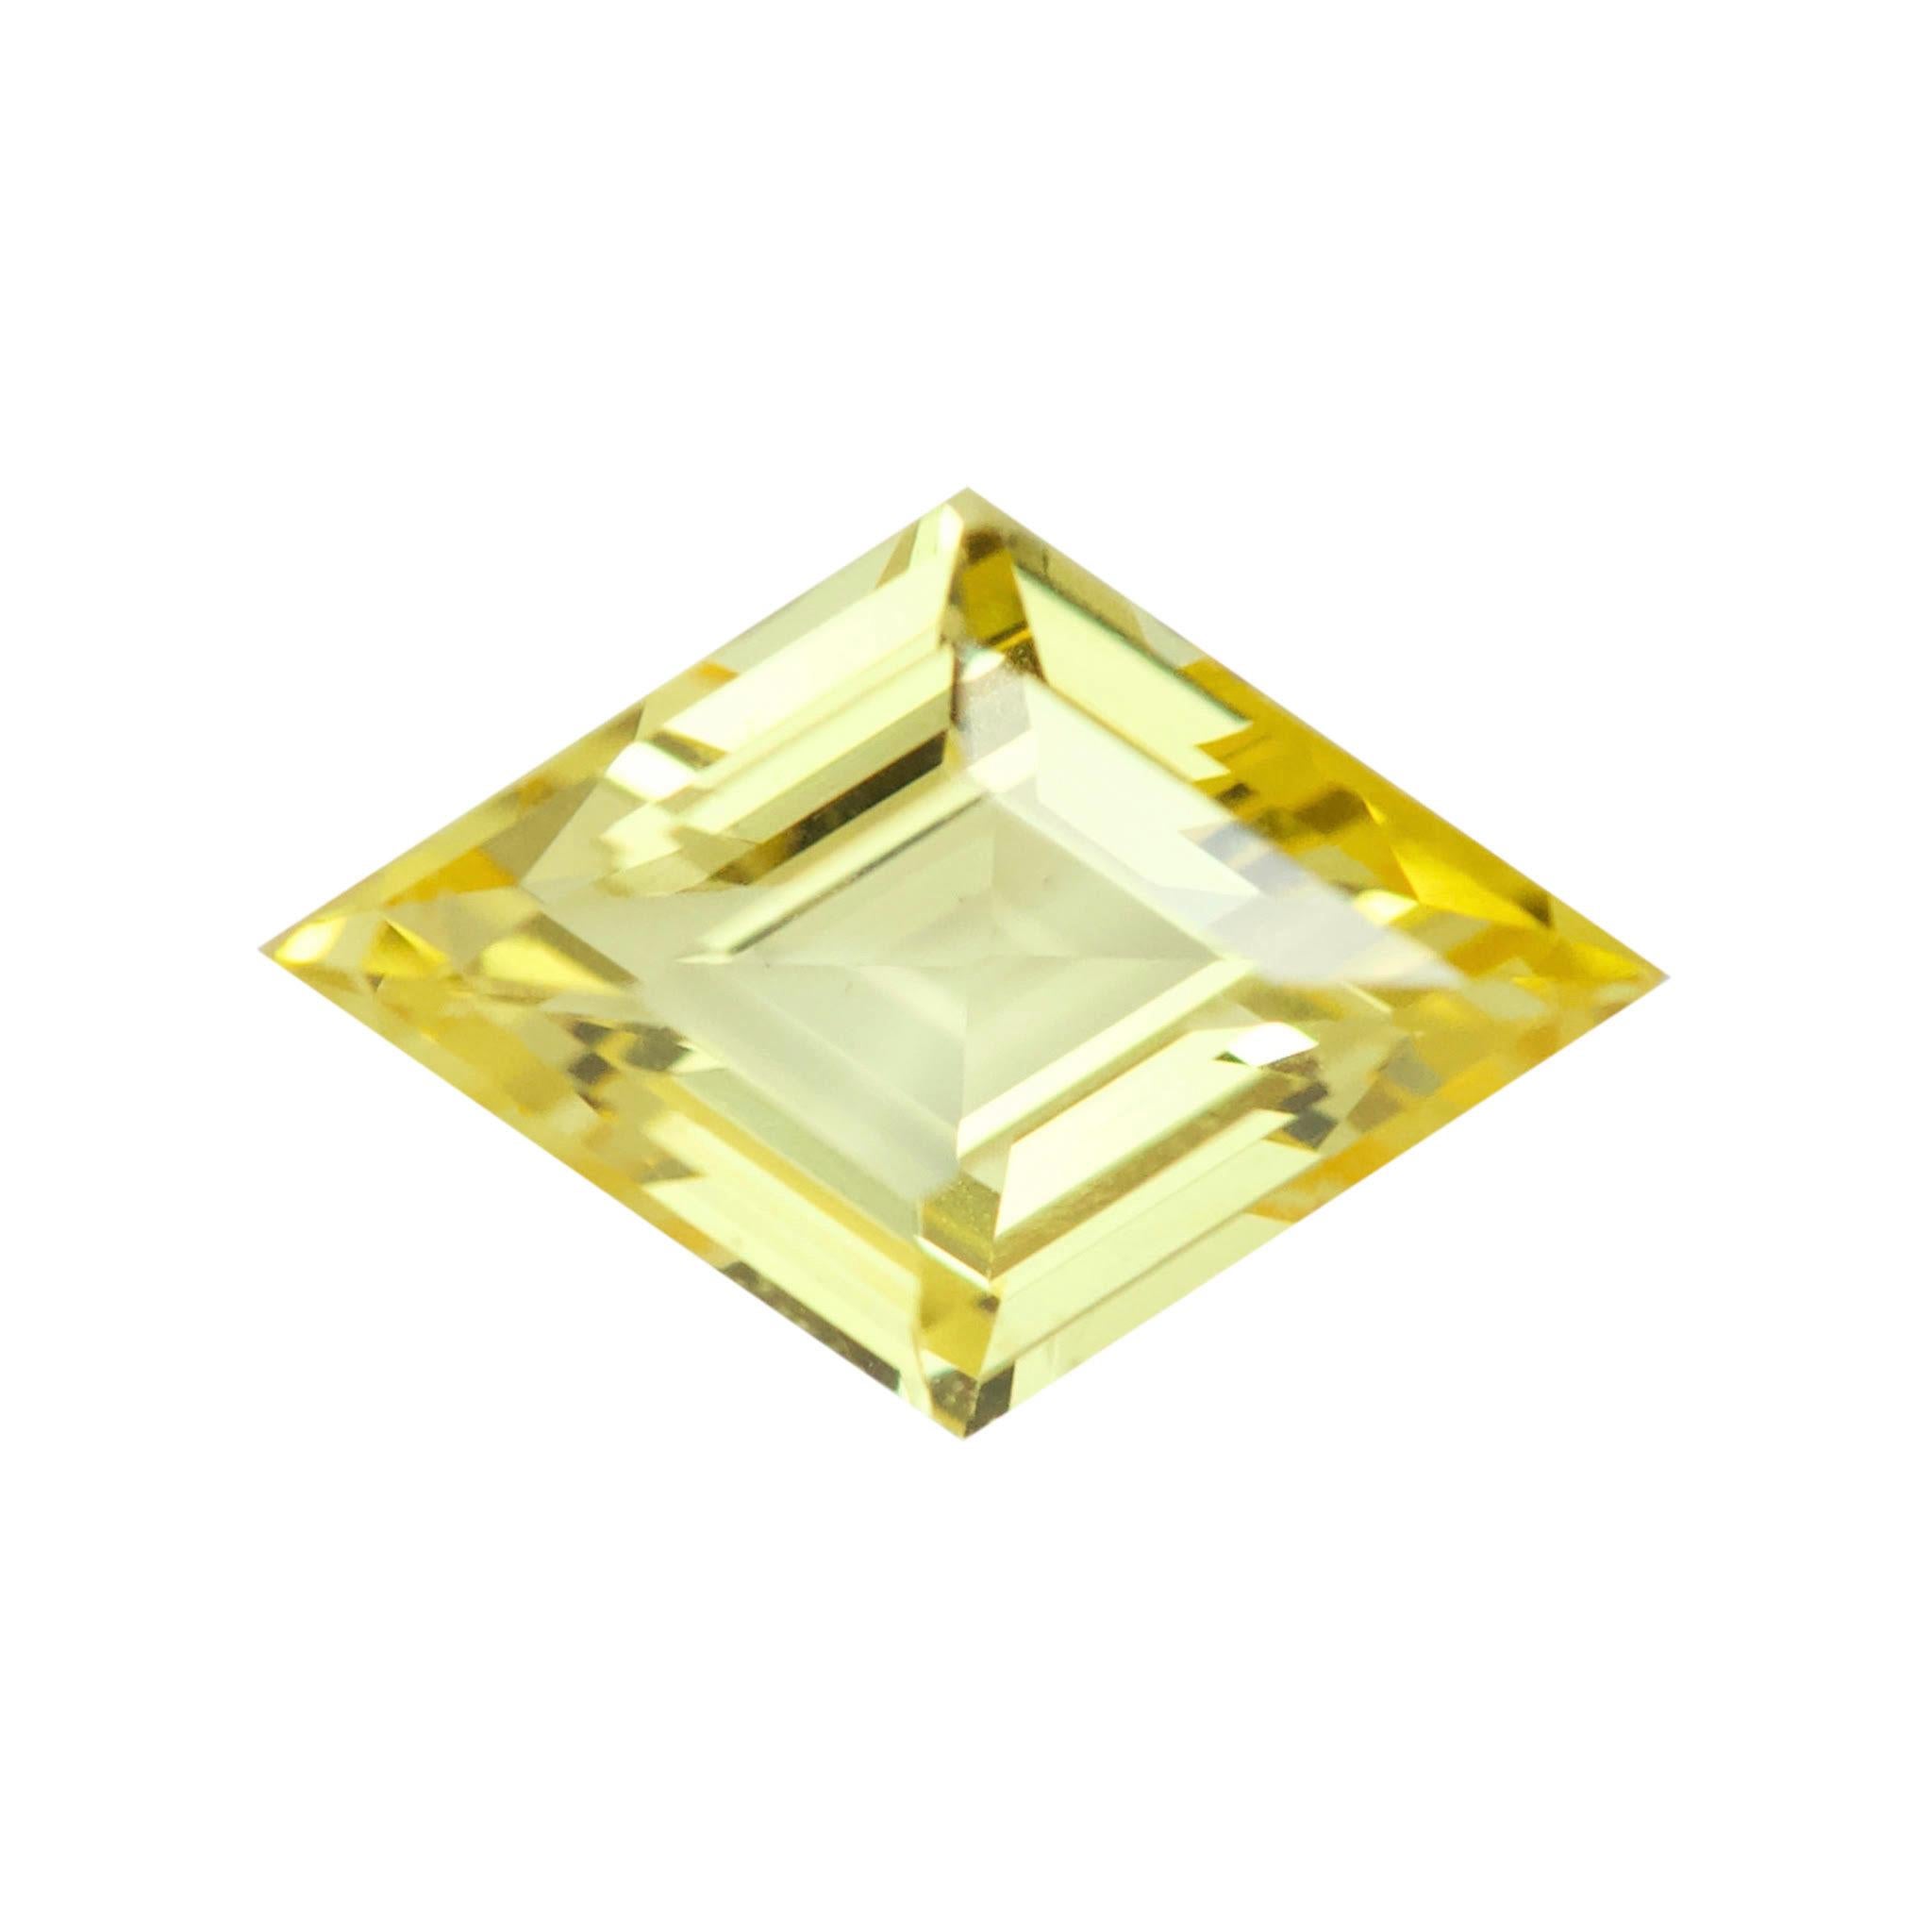 For an individual with a taste for that stand-out-in-the-crowd look this fancy lozenge cut yellow sapphire offers the perfect answer. A natural Ceylonese sapphire unique cut to reveal an elongated kite shape of over 1 carat with linear facets